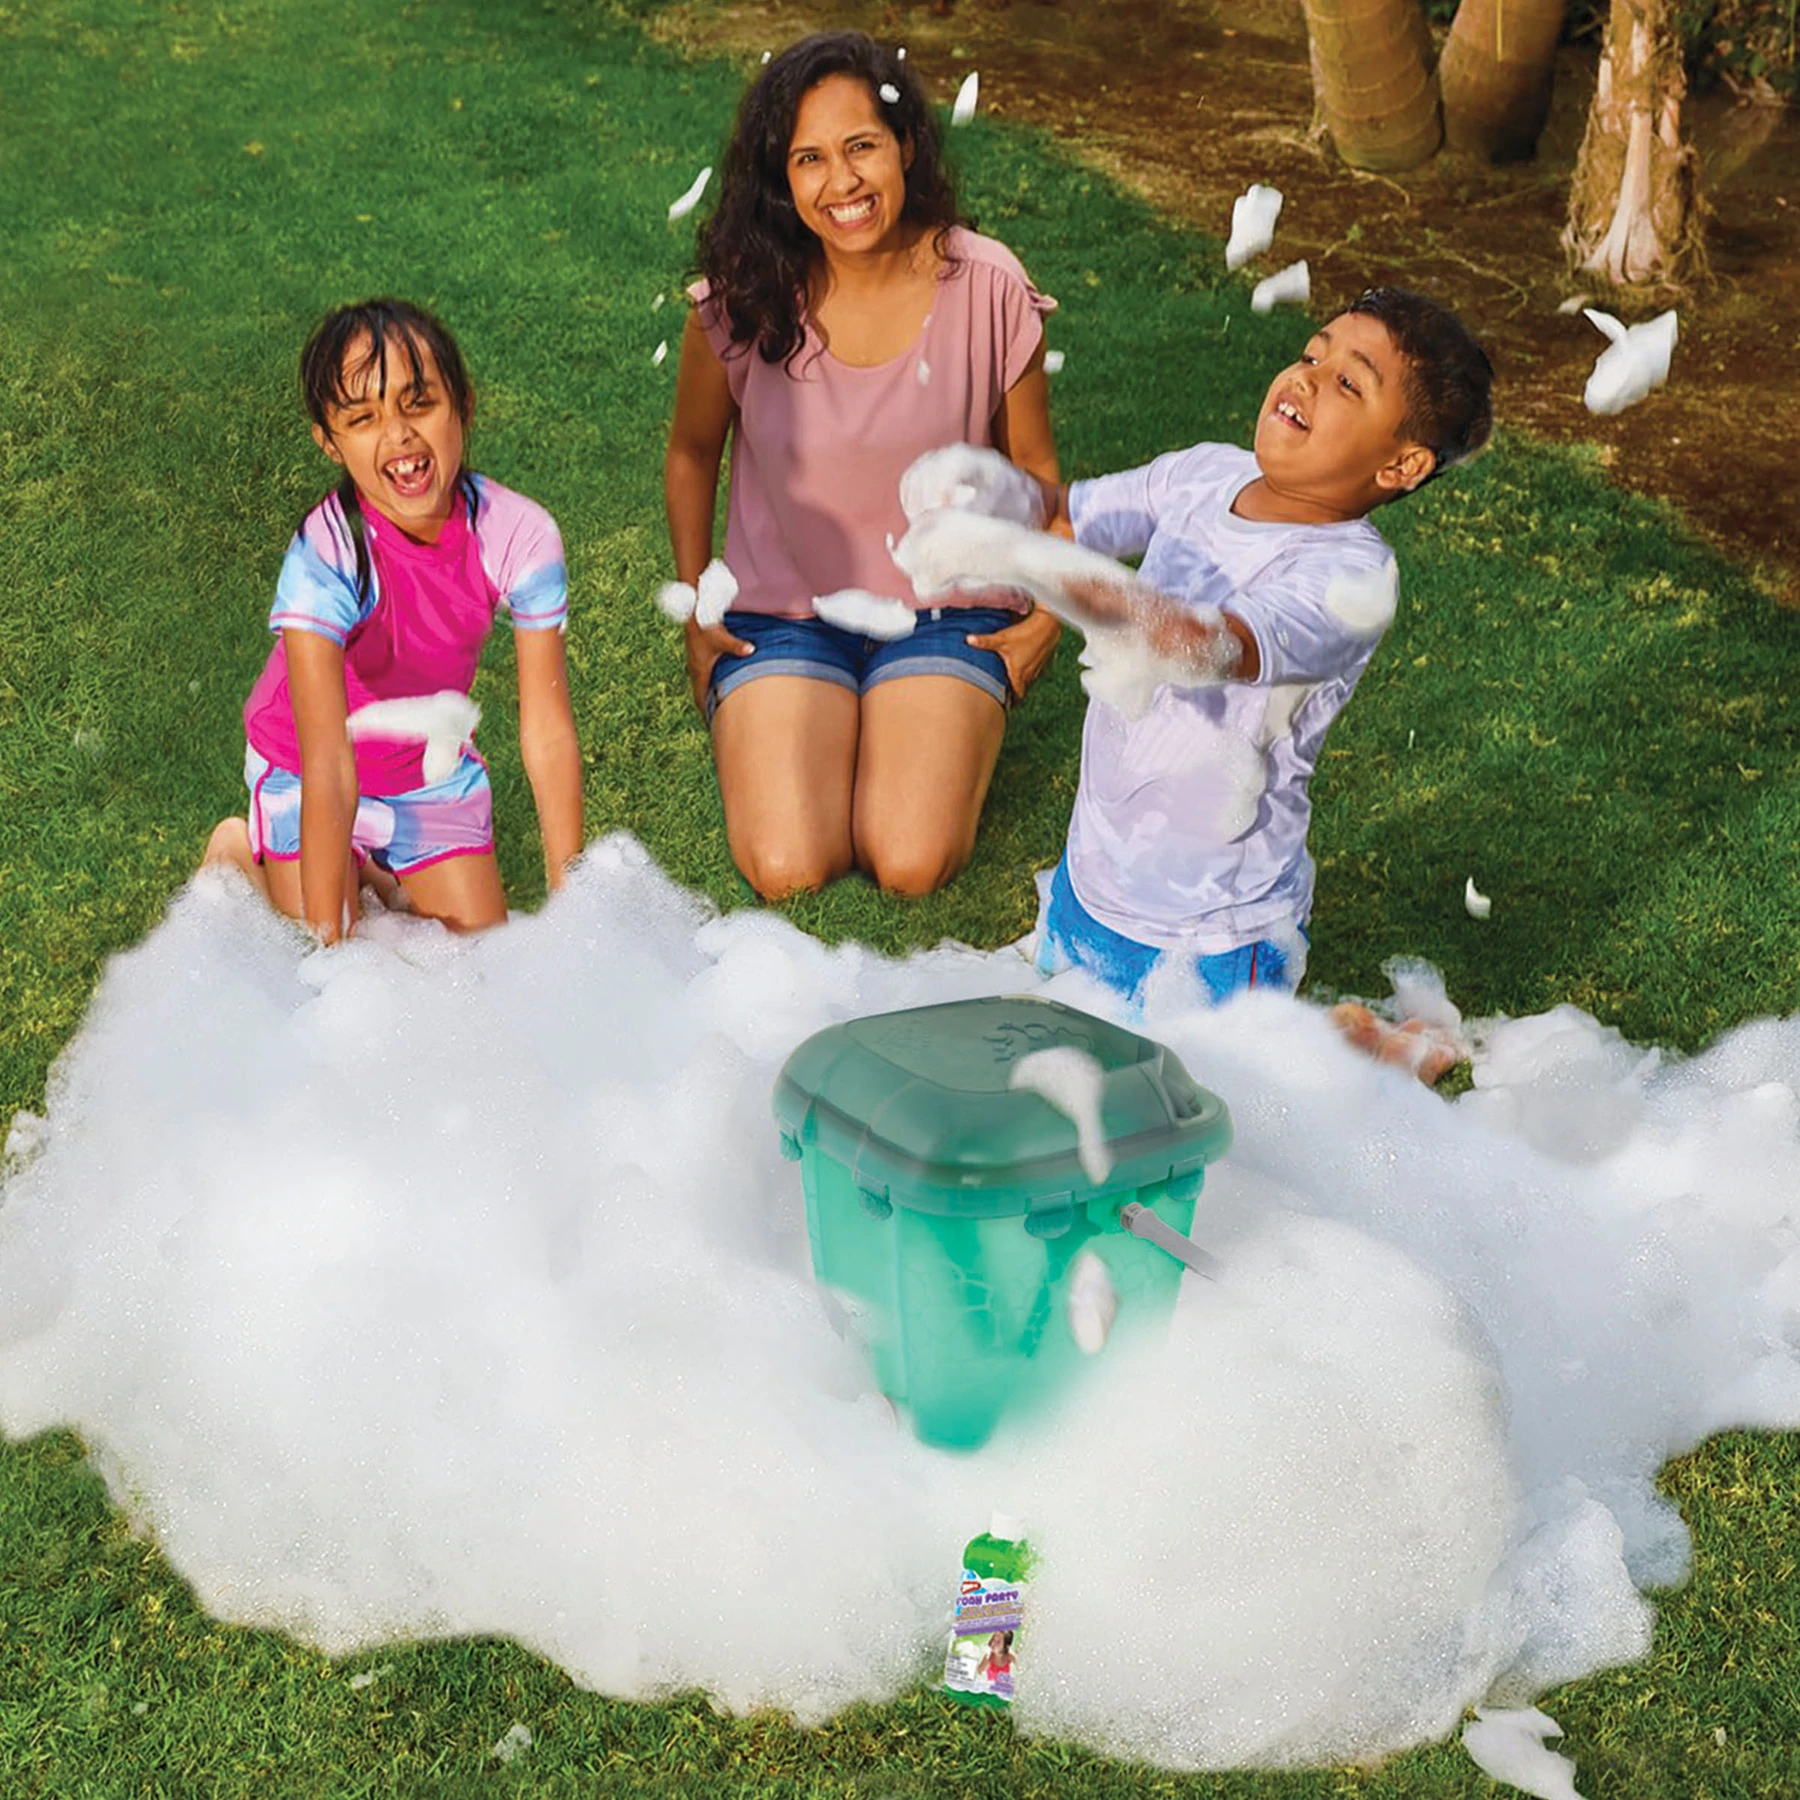 Introducing the Wham-O Super Foam Party